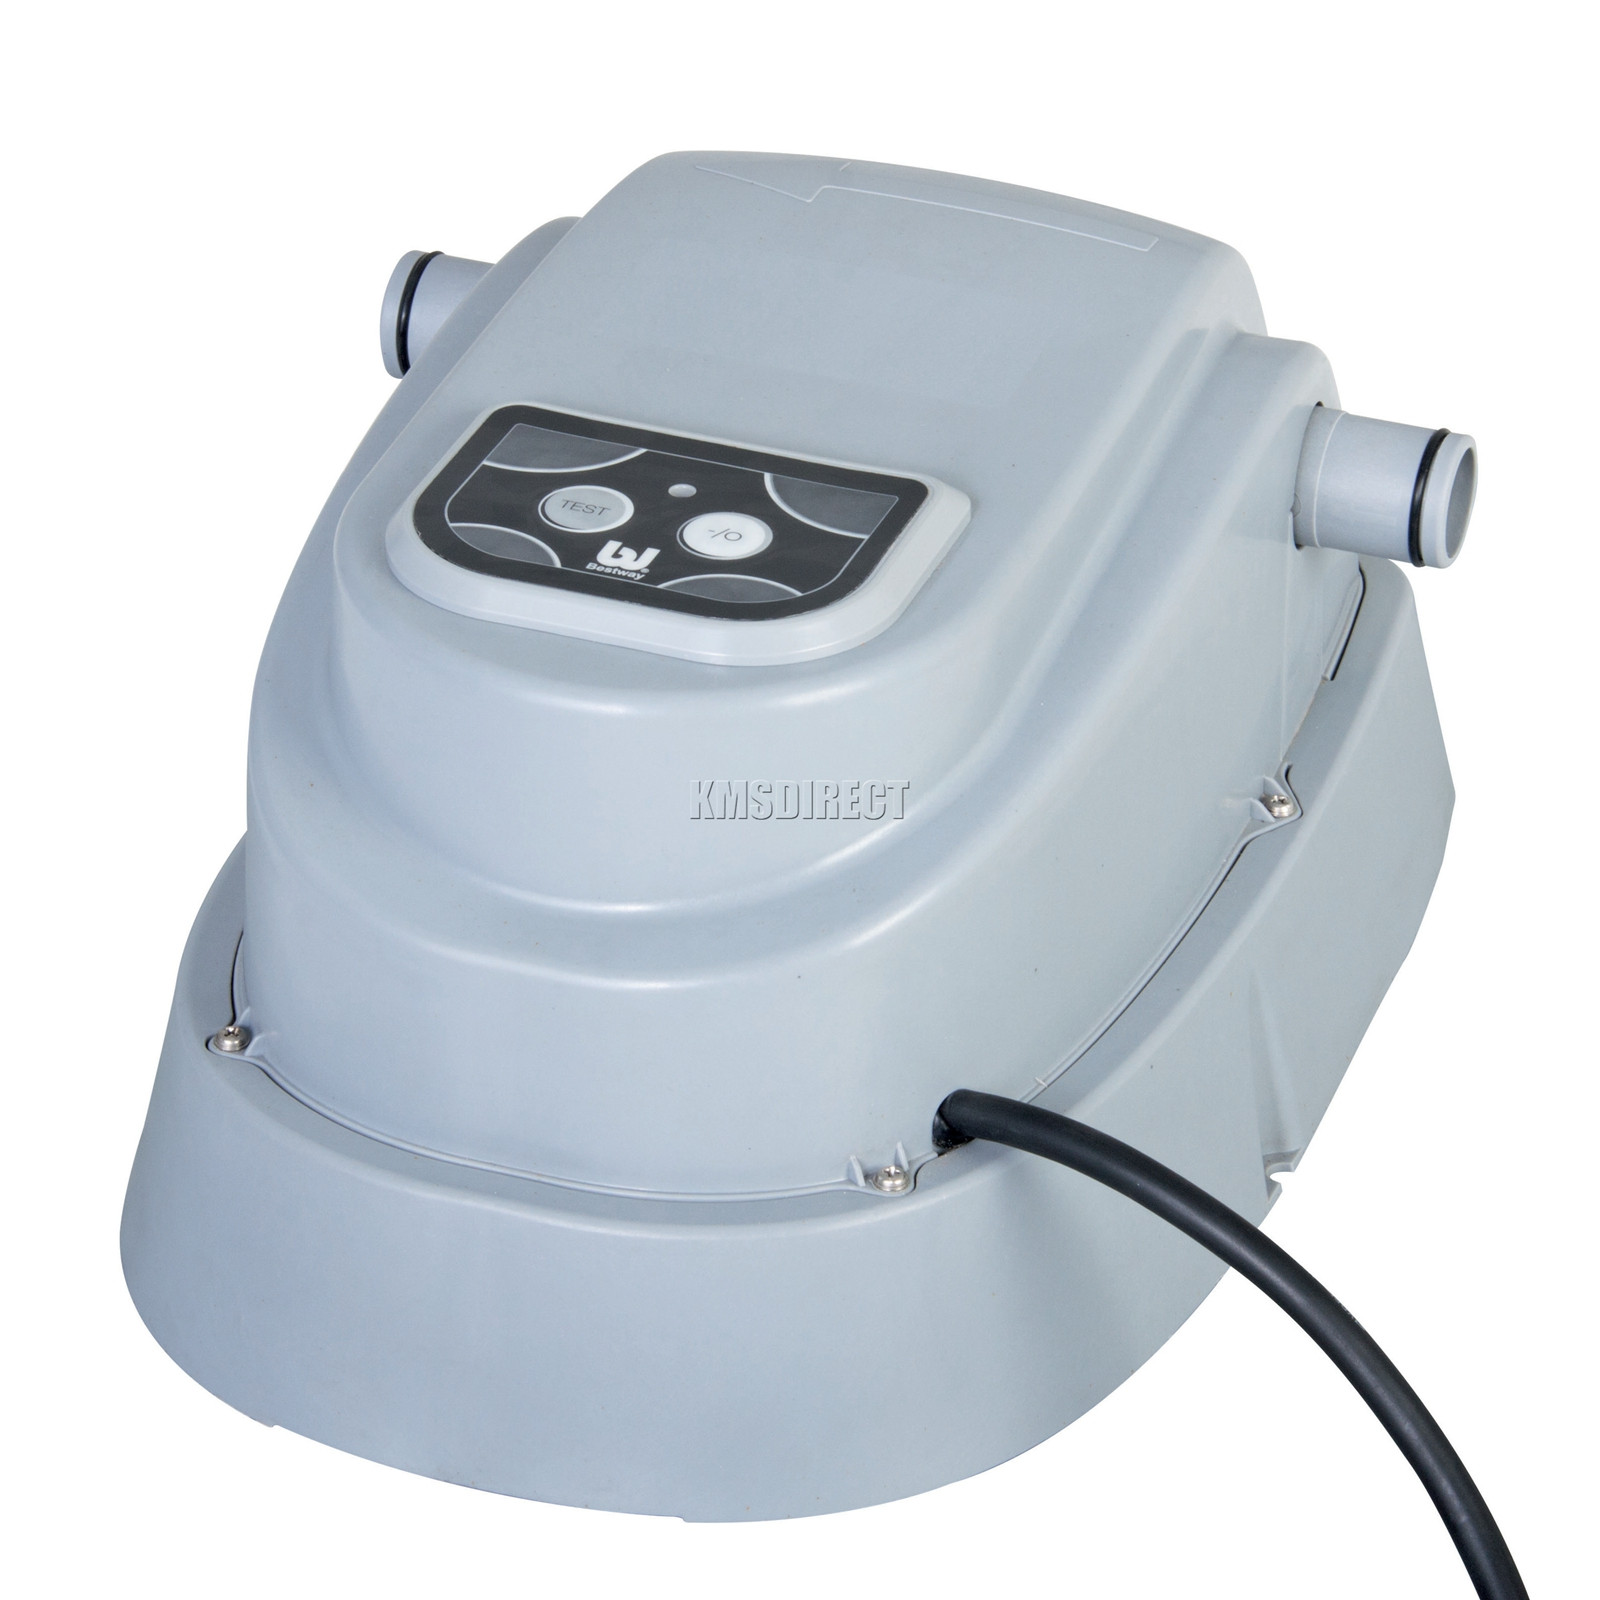 Electric Above Ground Pool Heater
 Bestway Electric Swimming Pool Heater 2 8KW 2800W For